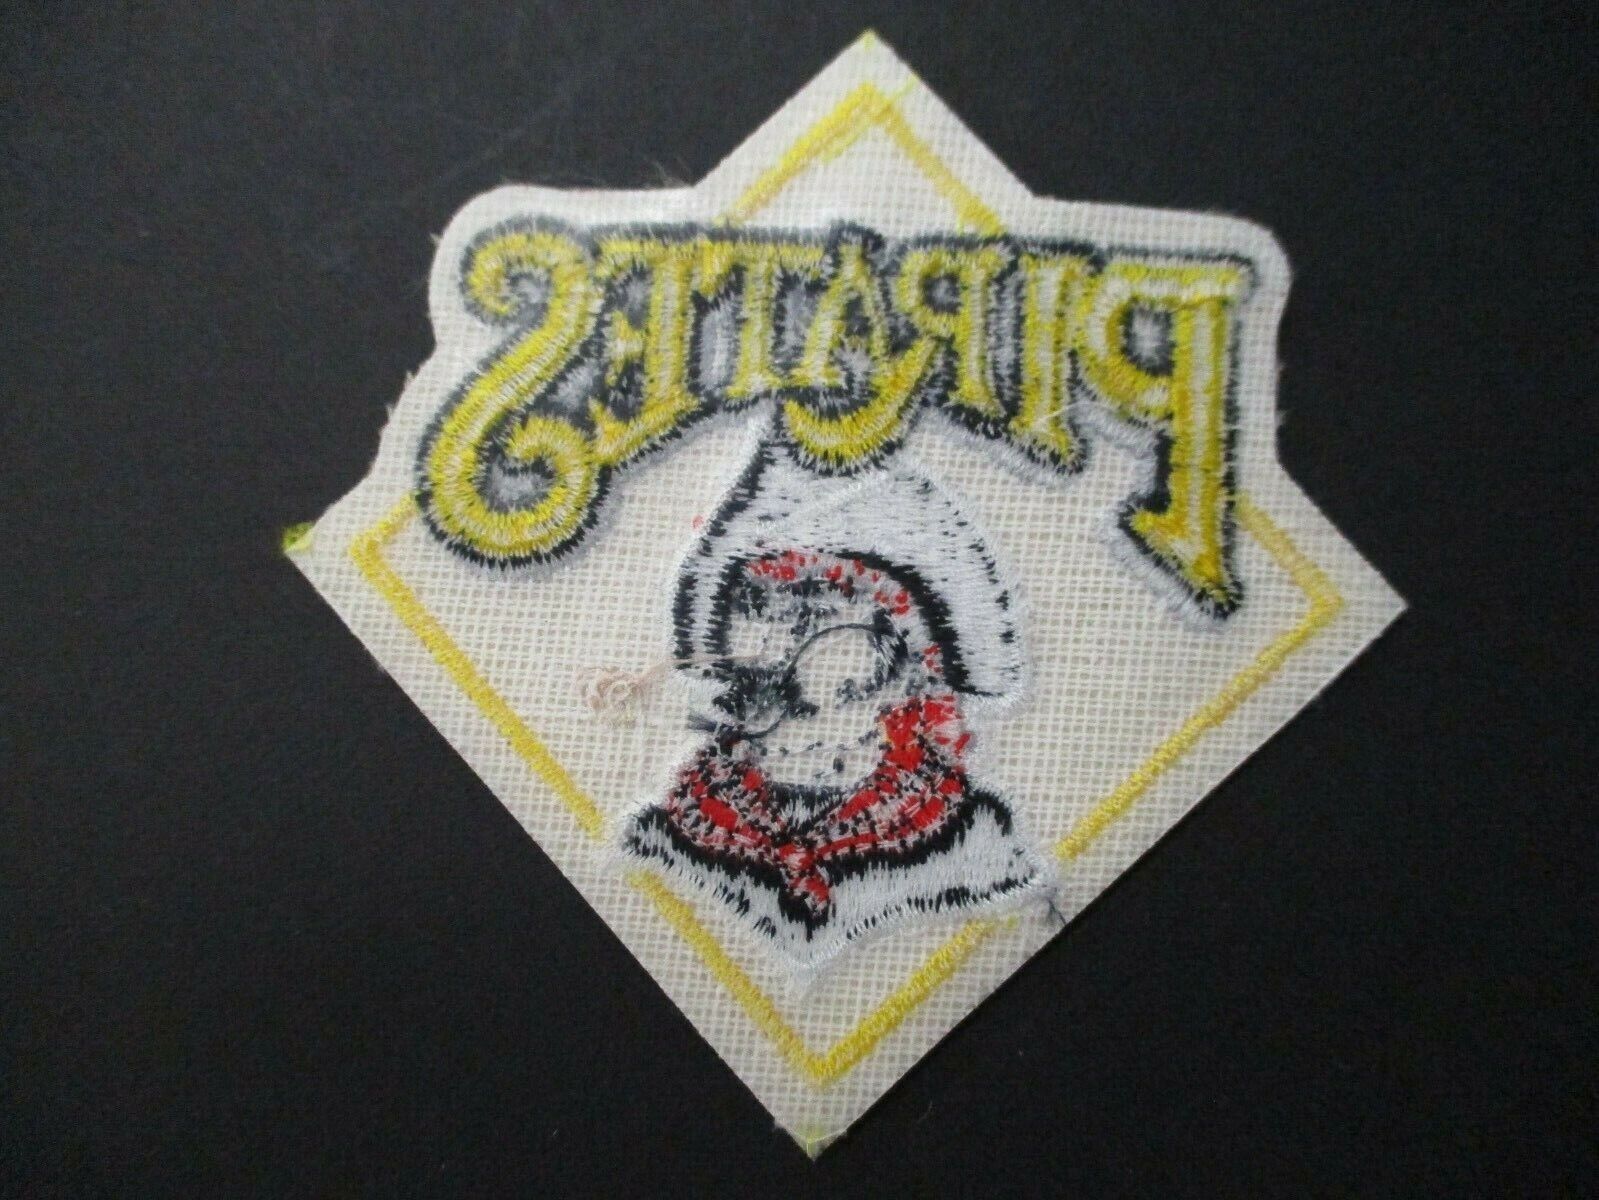 Pittsburgh Pirates Patch Size 3.25 x 3.25 inches